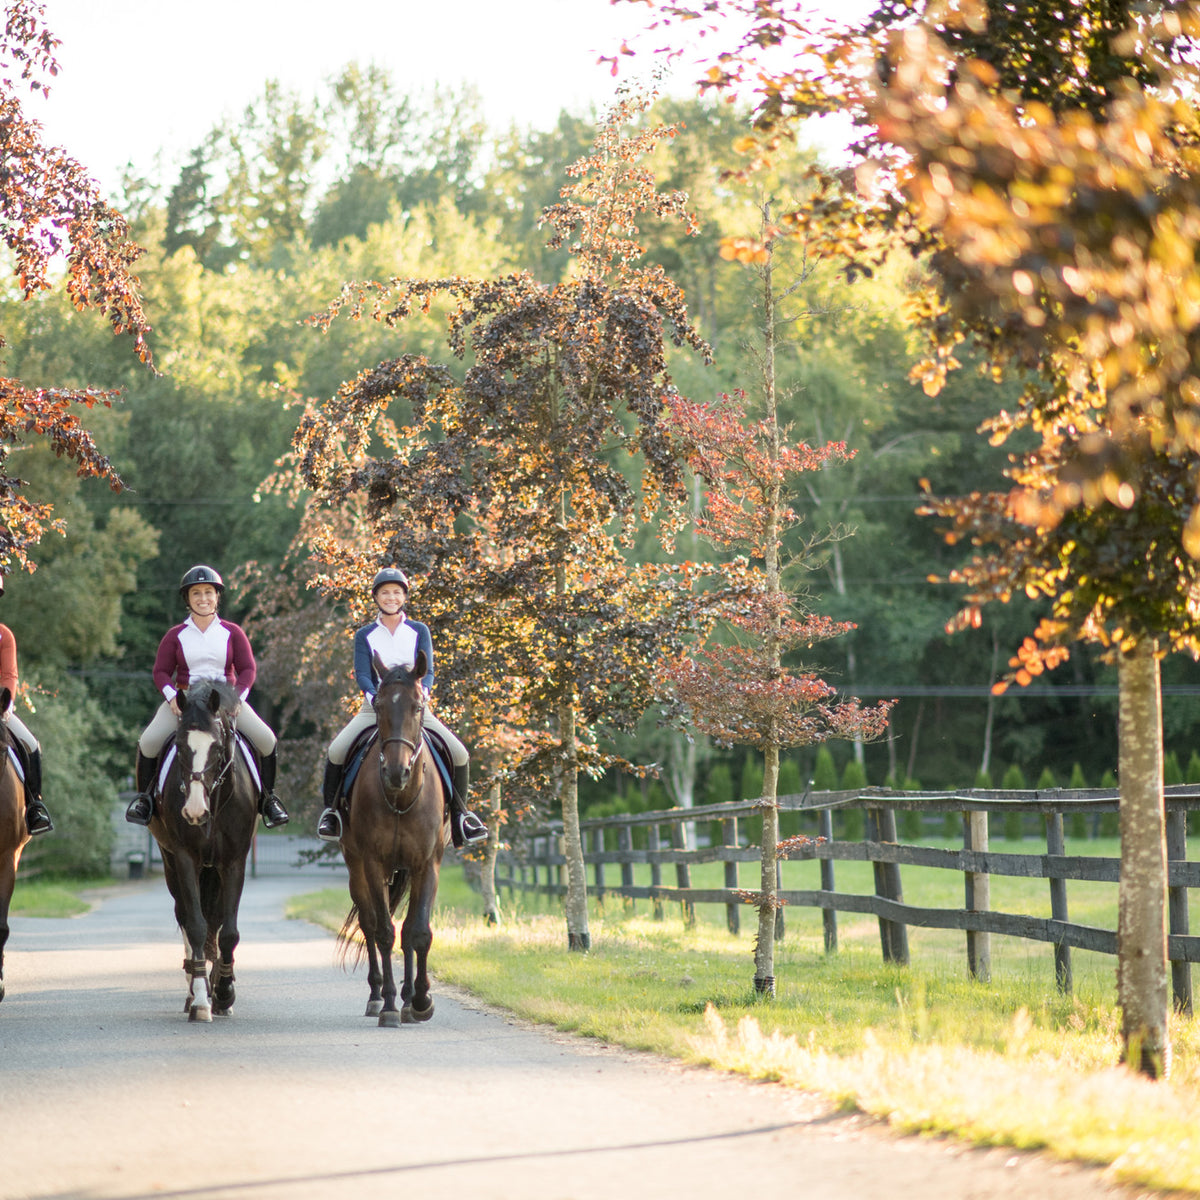 What's It Really Like To Be in Equestrian Fashion?